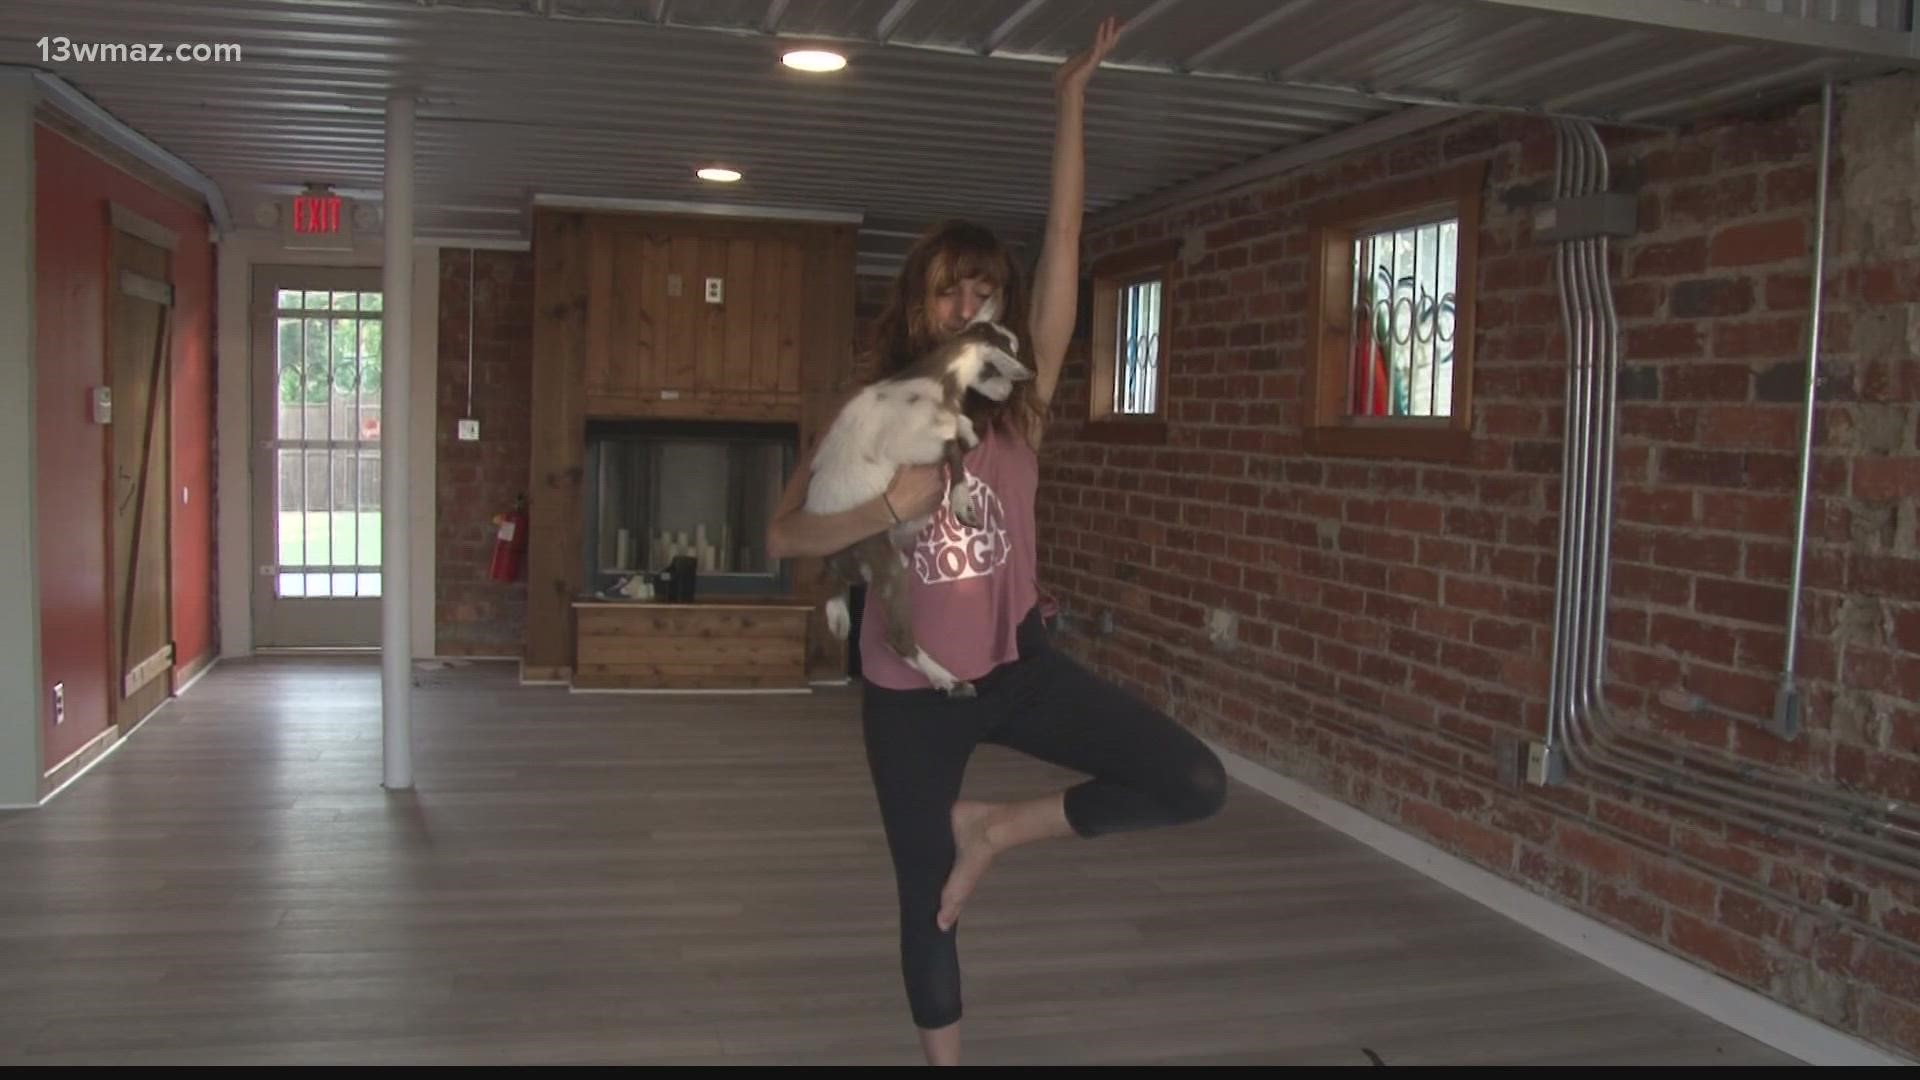 Goat Yoga is such a different way to relive stress that many central Georgians are taking part along with people around the U.S.